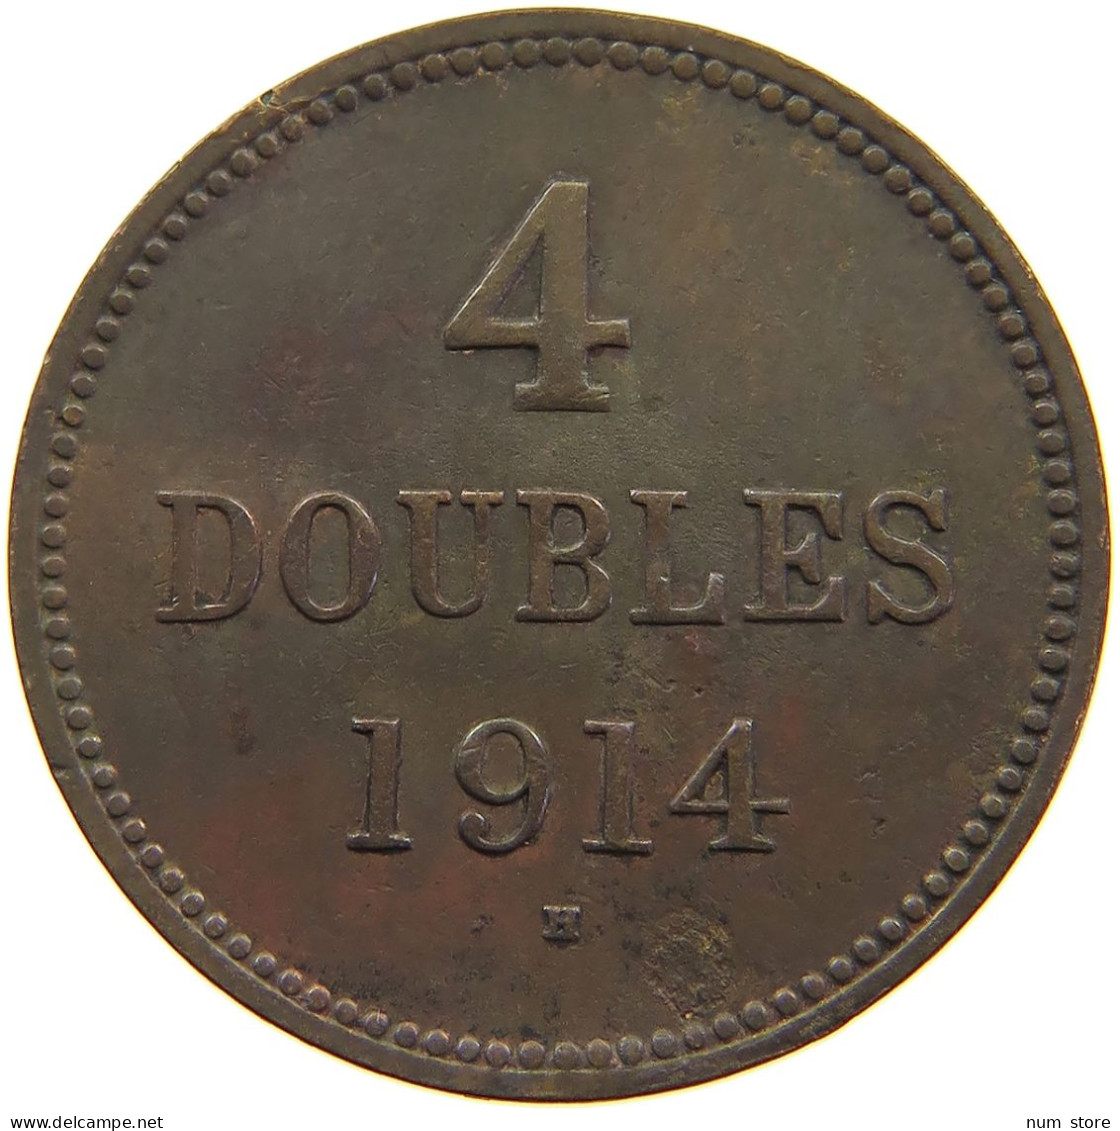 GUERNSEY 4 DOUBLES 1914 George V. (1910-1936) #a062 0399 - Guernsey